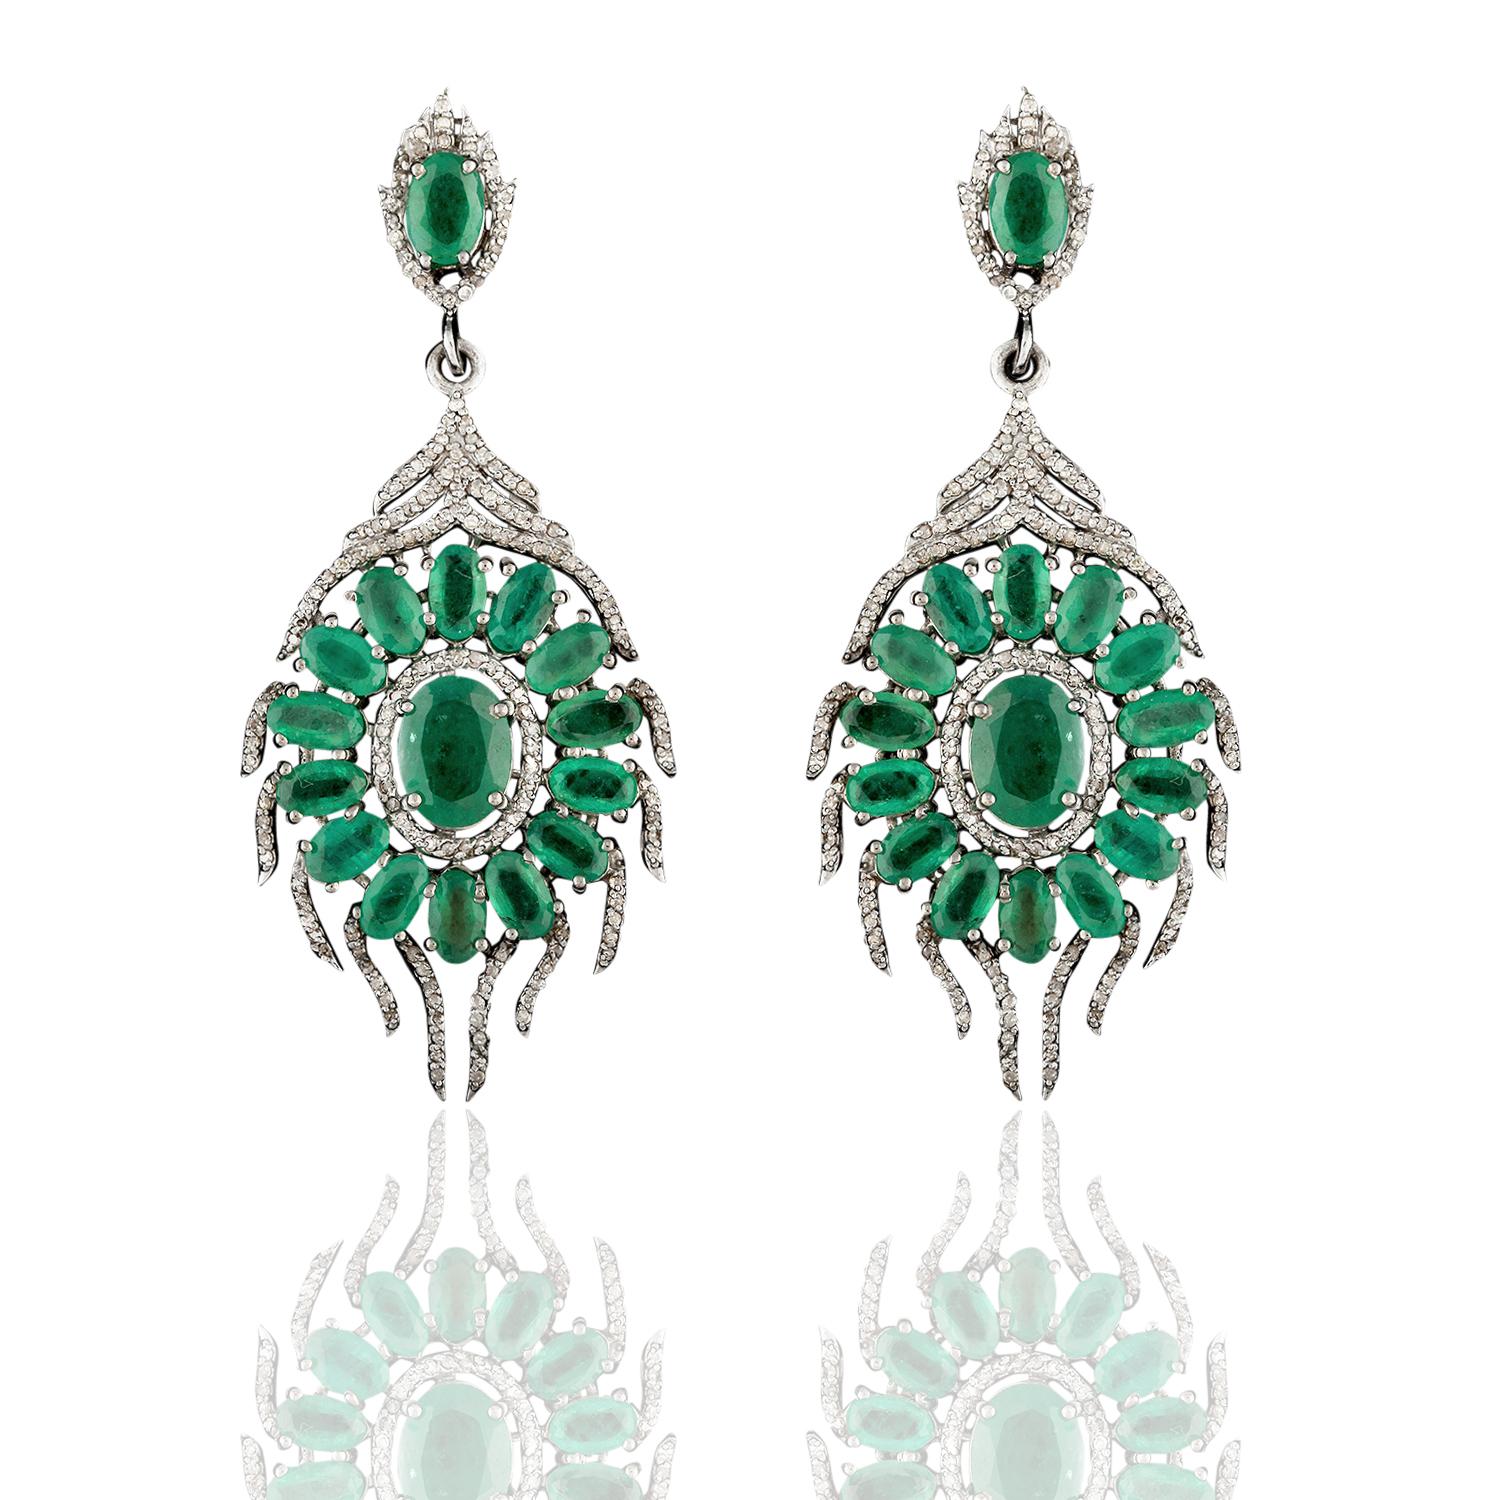 Beautifully & delicately crafted on silver and 14kt gold with 8.58 carat of emeralds & 1.60 carat of single cut diamonds.

Silver: 6.964 grams; 14kt gold: 0.9 grams.

5 cm in full length. Very light weight for pierced ears.